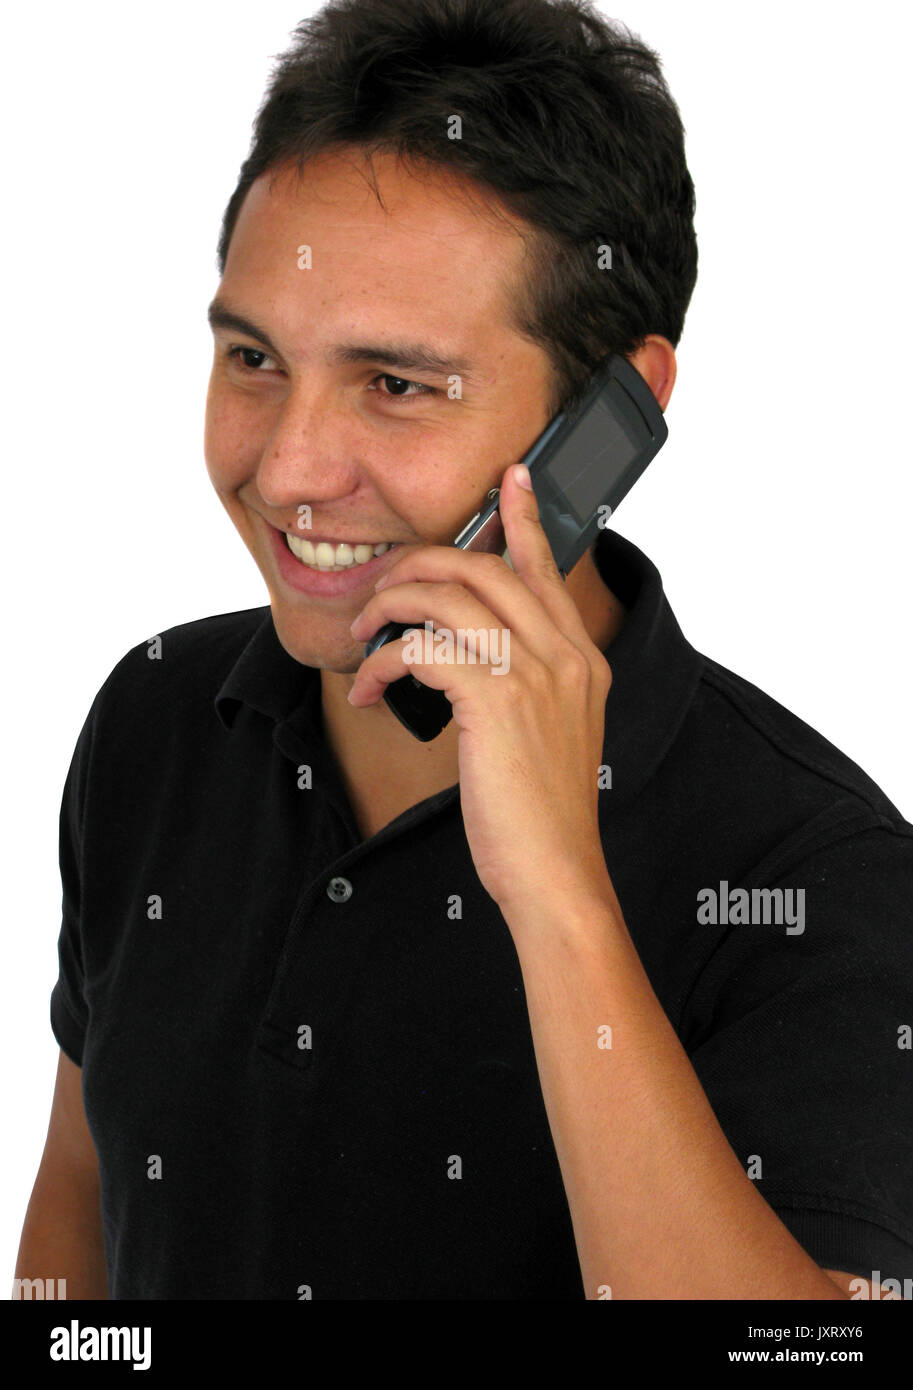 Attractive Young Man On Cellphone With Smile Stock Photo